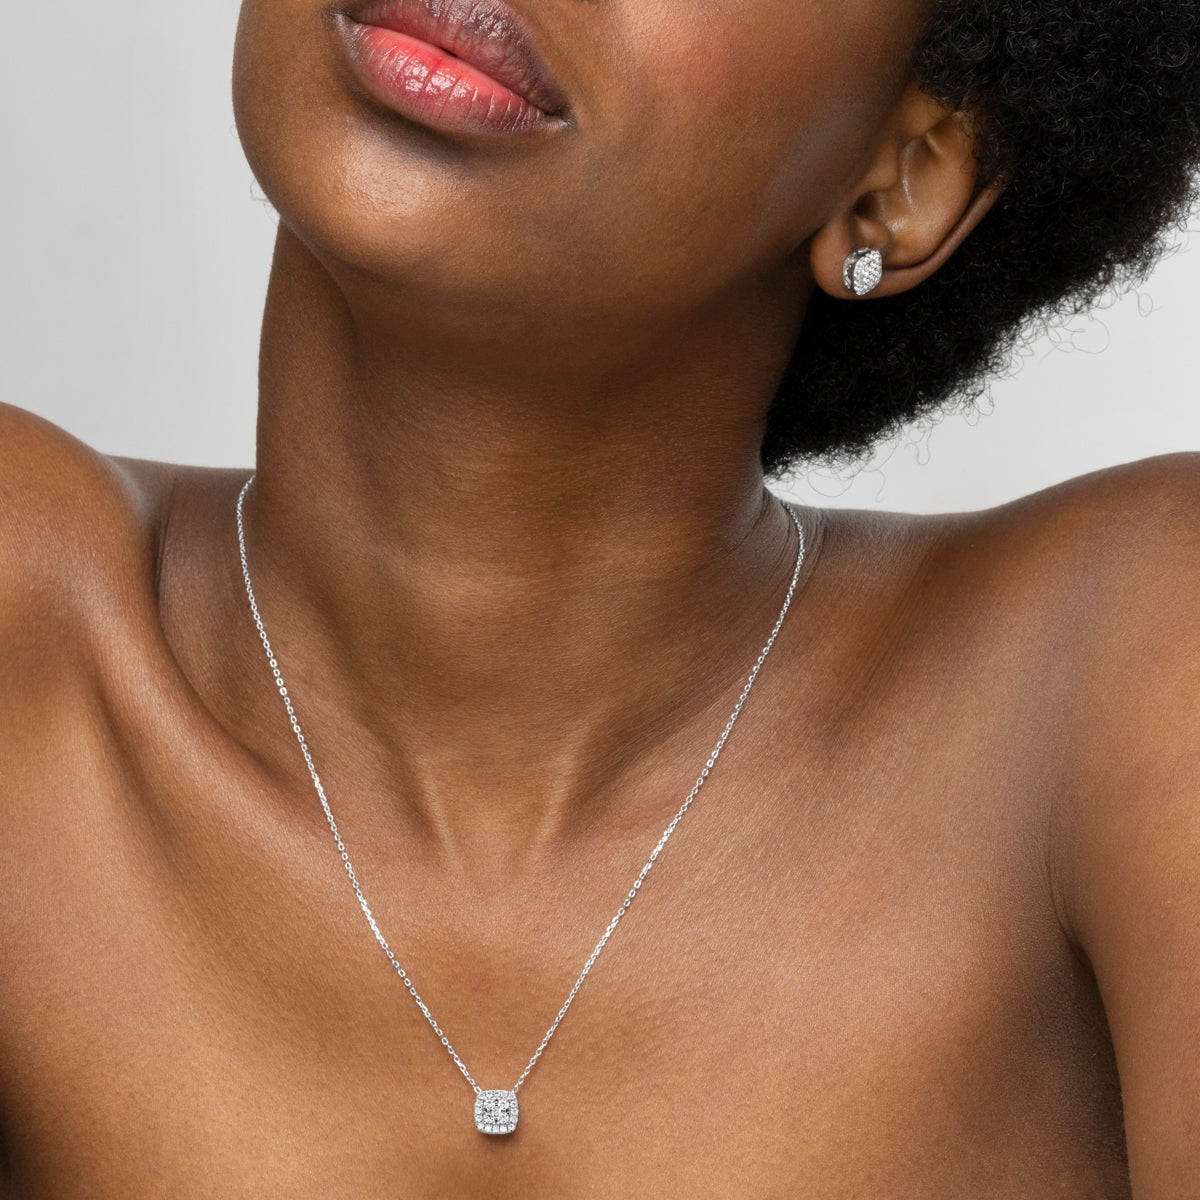 Amanba 925 Sterling Silver Necklace